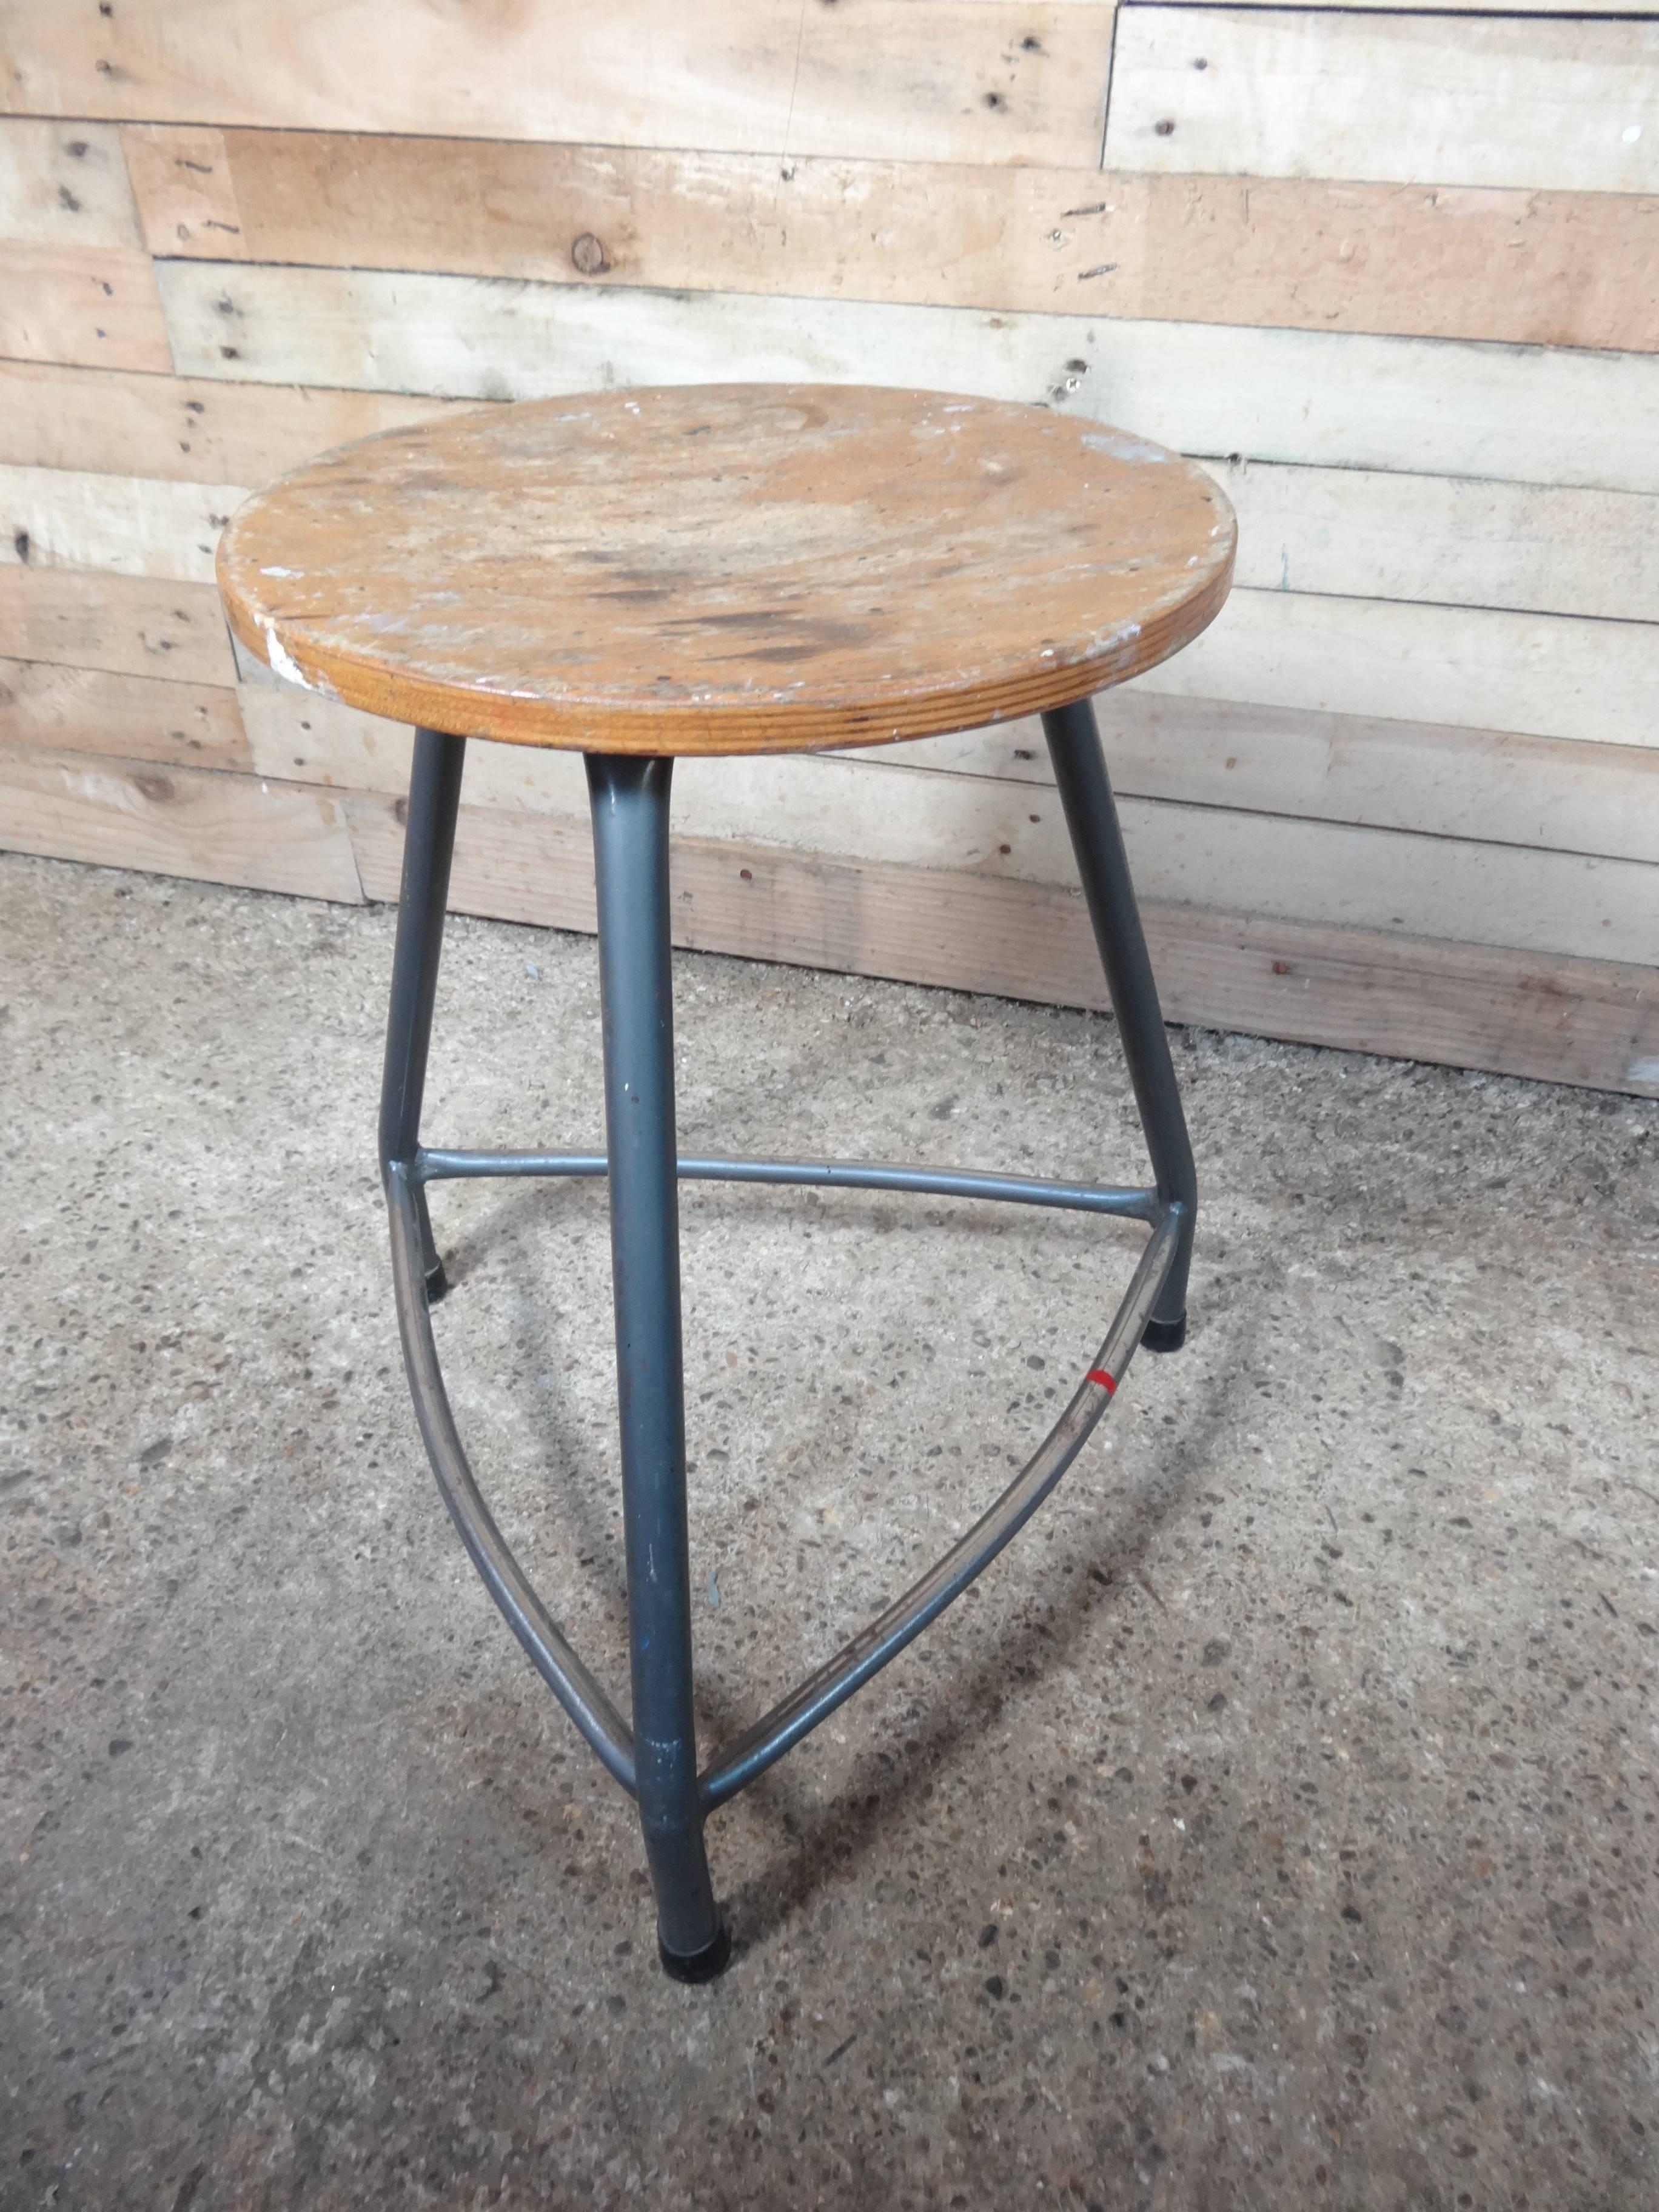 Original 1960s retro vintage French Painters Stool In Good Condition For Sale In Markington, GB